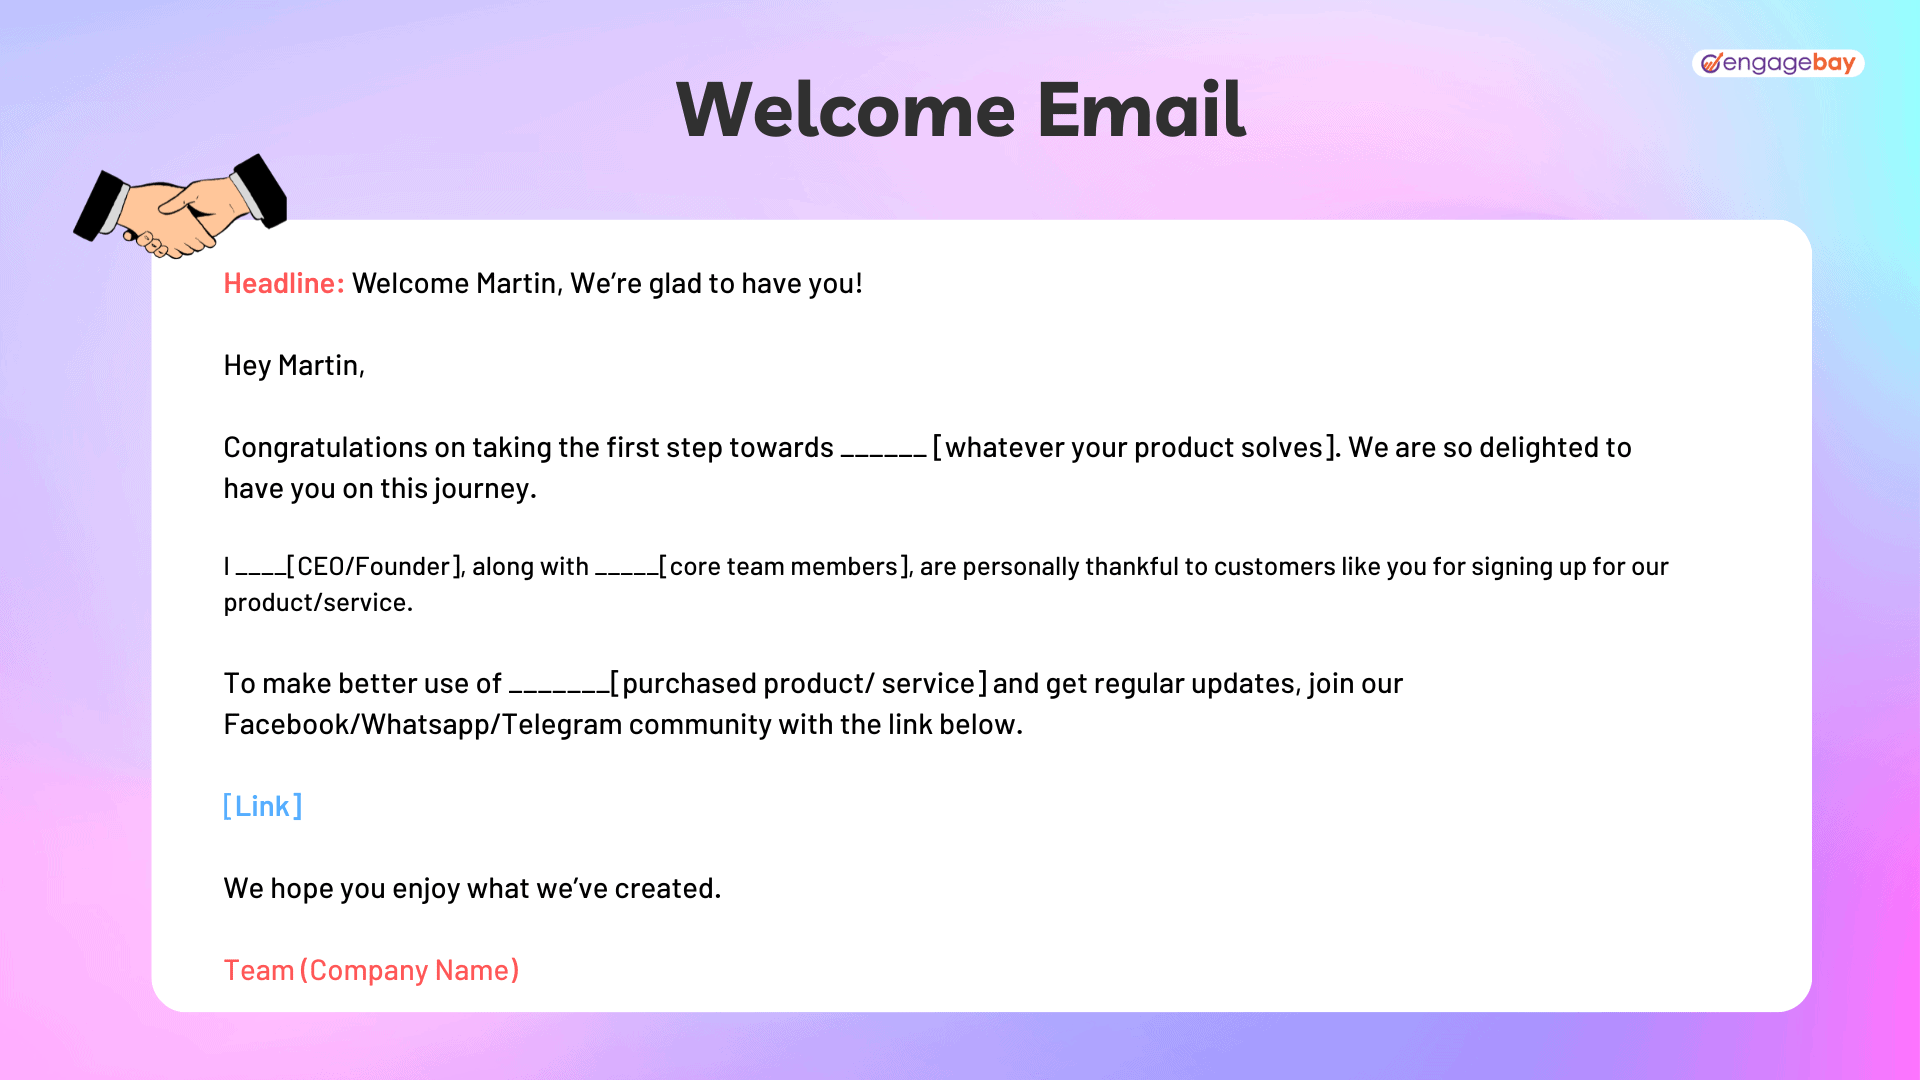 welcome email template by EngageBay